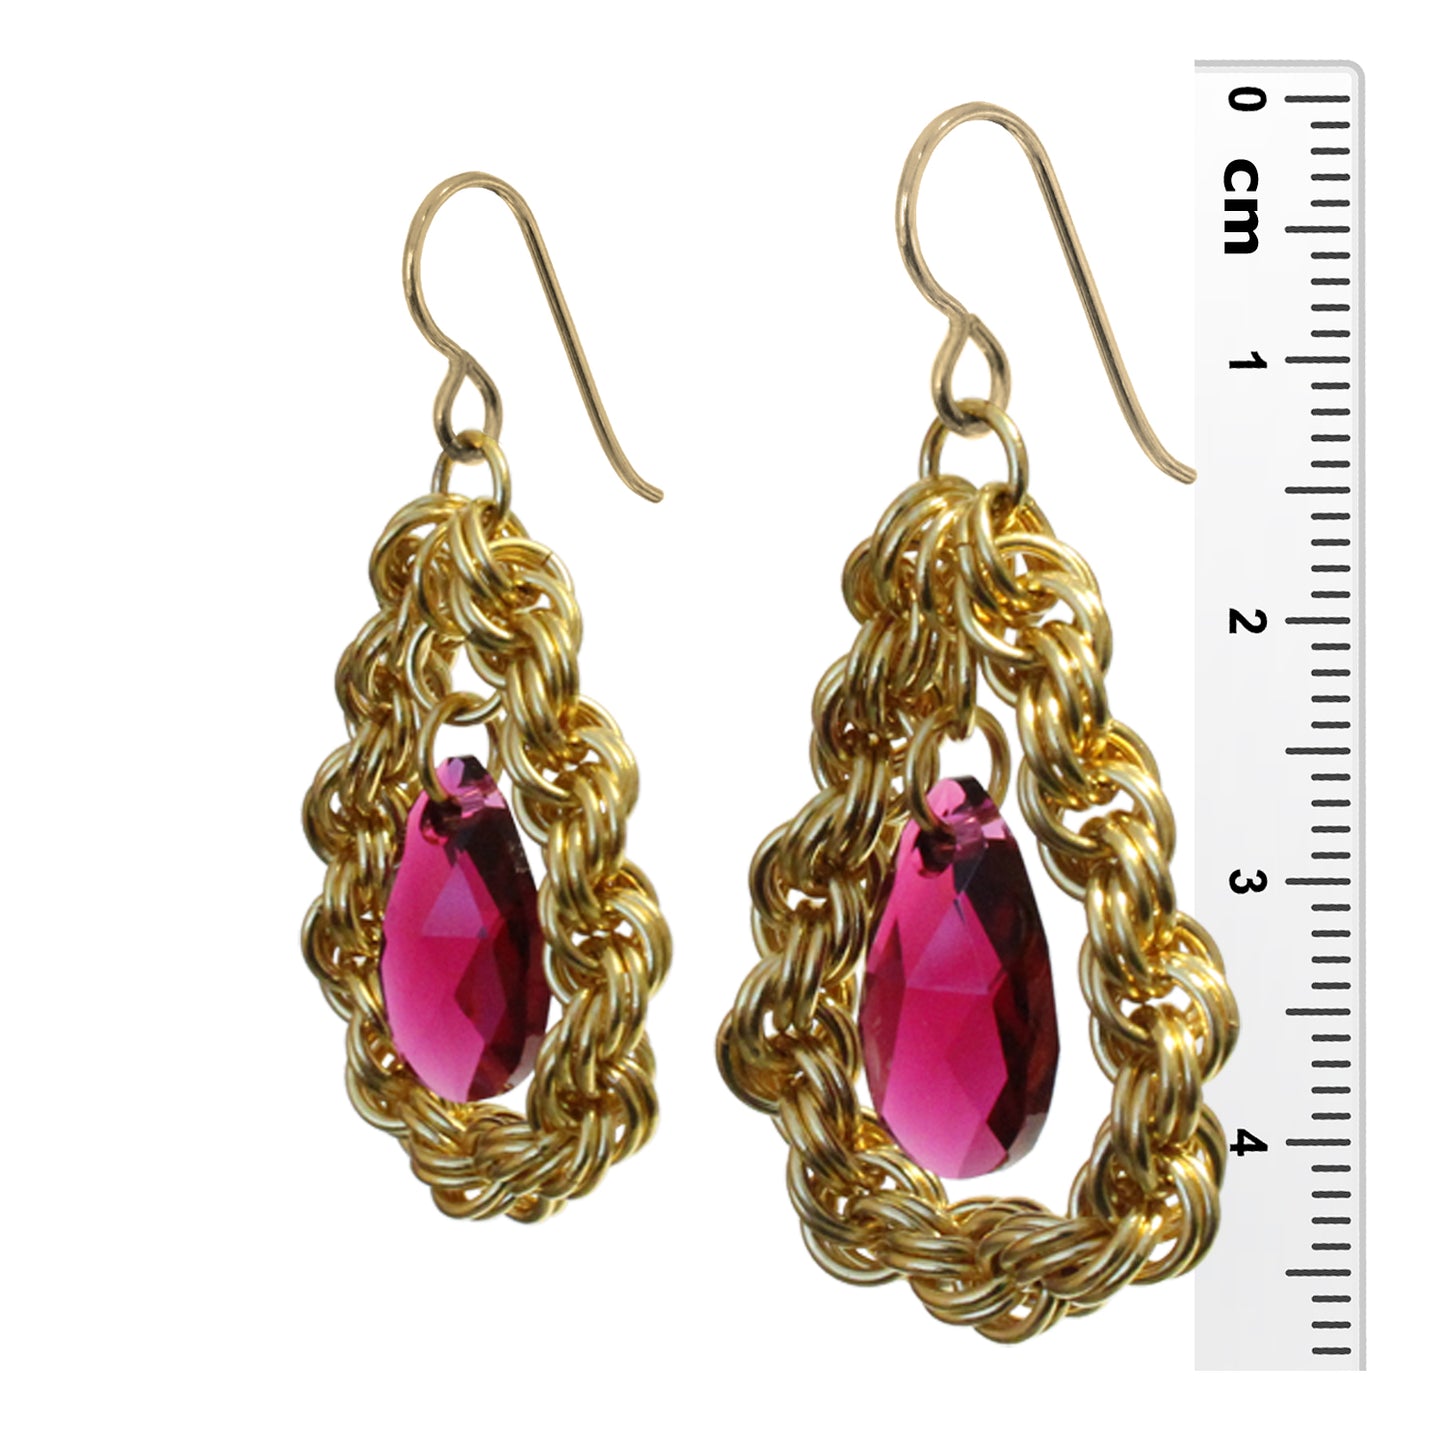 Red Carpet Chainmail Earrings / 48mm length / gold filled earwires